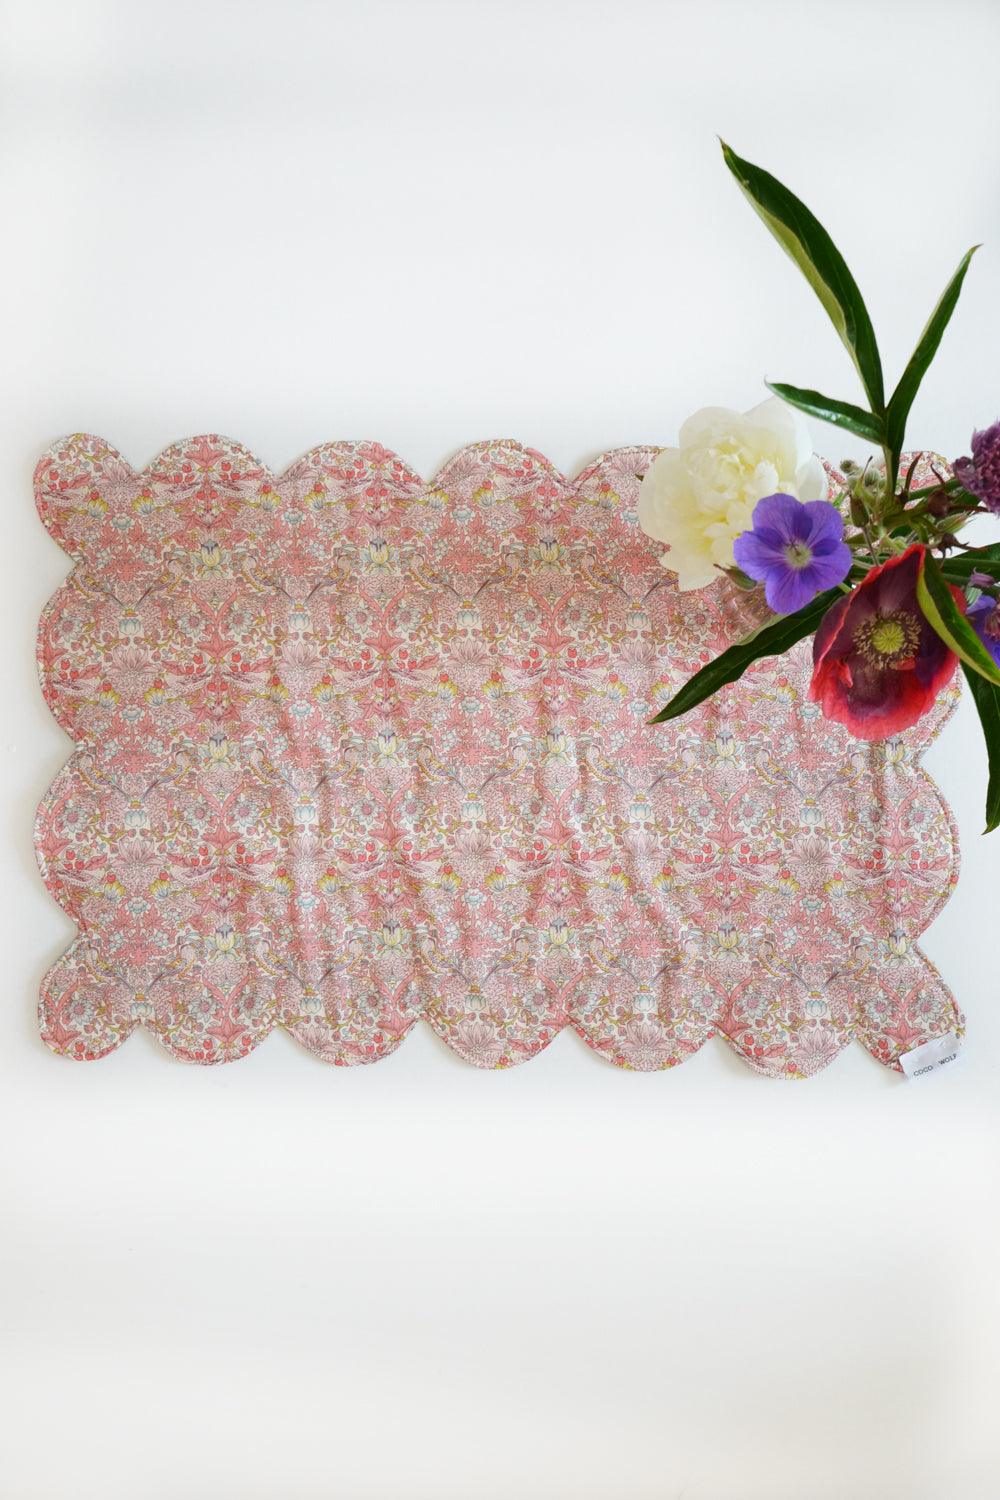 Scalloped Placemat made with Liberty Fabric STRAWBERRY THIEF SPRING - Coco & Wolf